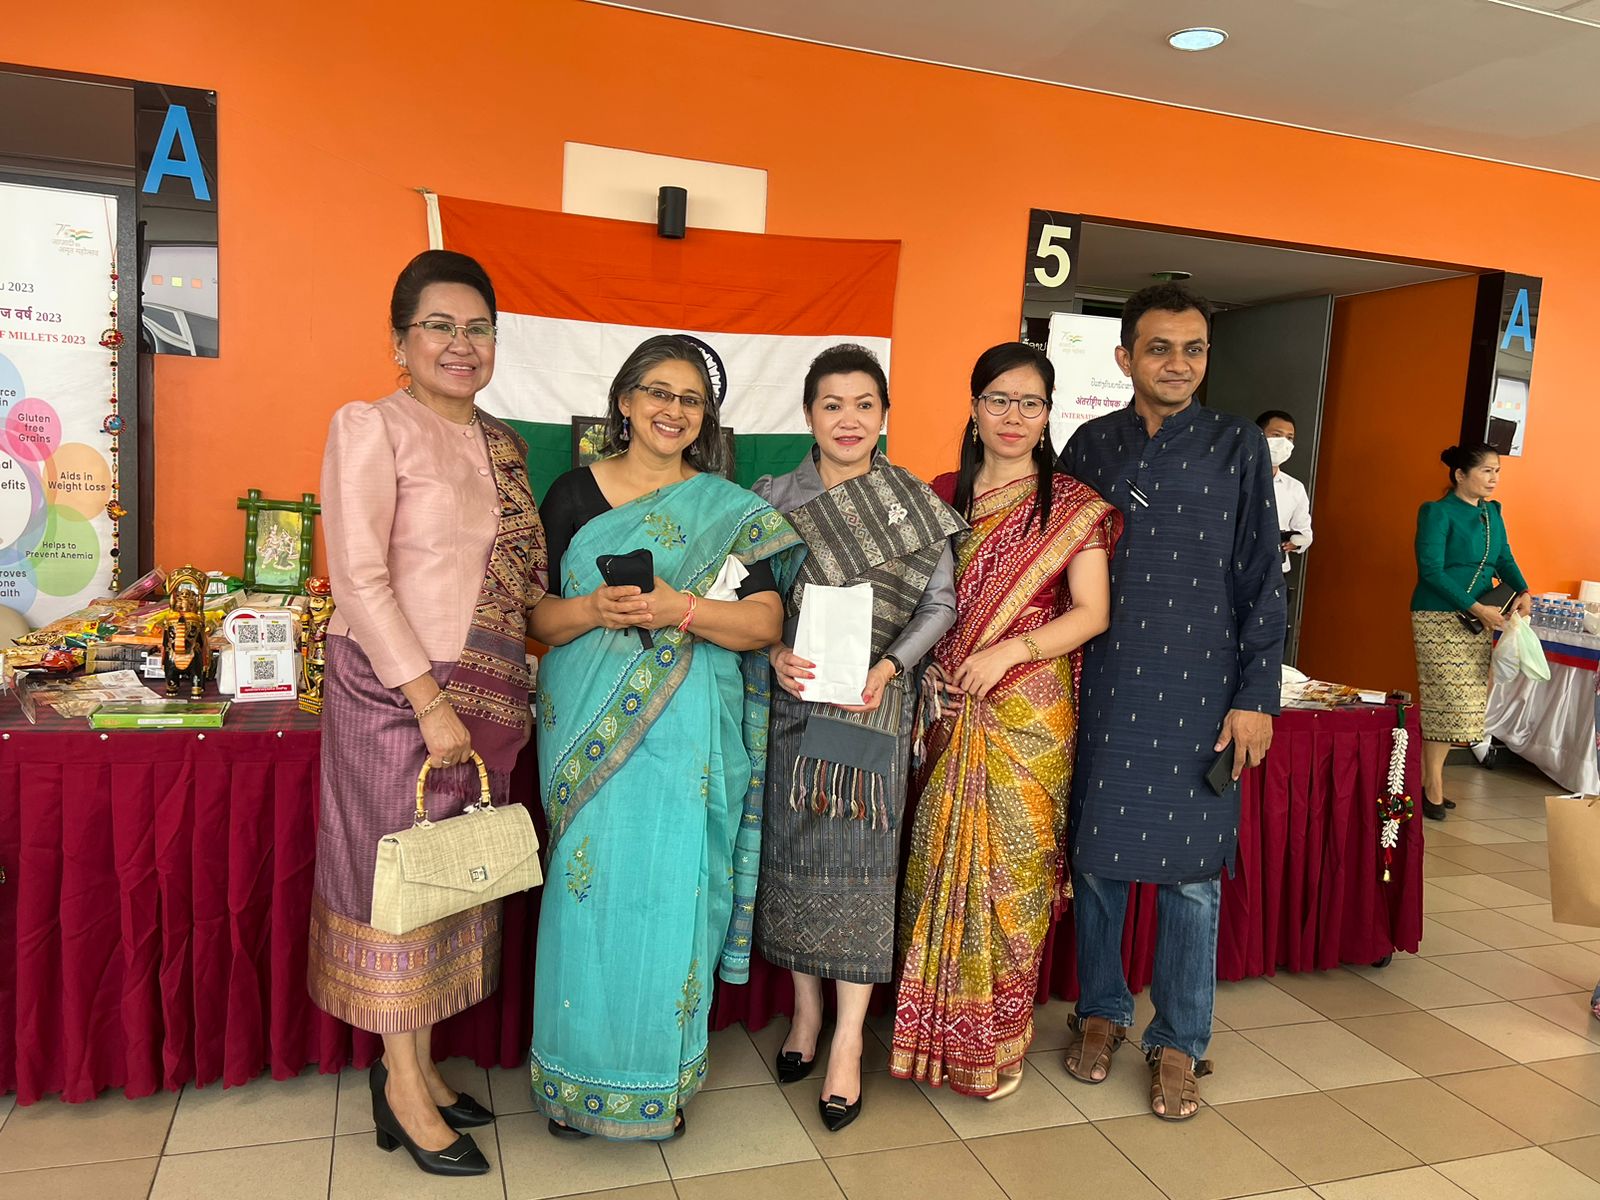 (left to right) Mrs. ViengNgern Khaykhamphithoun (Spouse of the Deputy of Prime Minister), Madam Nidhi Srivastava Asthana, Mrs. Alounny Kommasith a (Spouse of H.E. Mr. Saleumxay KOMMASITH, Deputy Prime Minister, Minister of Foreign Affairs of the Lao PDR) and Indian restaurant owners whose setup a stall to represent Indian Food (including millet dishes) and Artifacts.